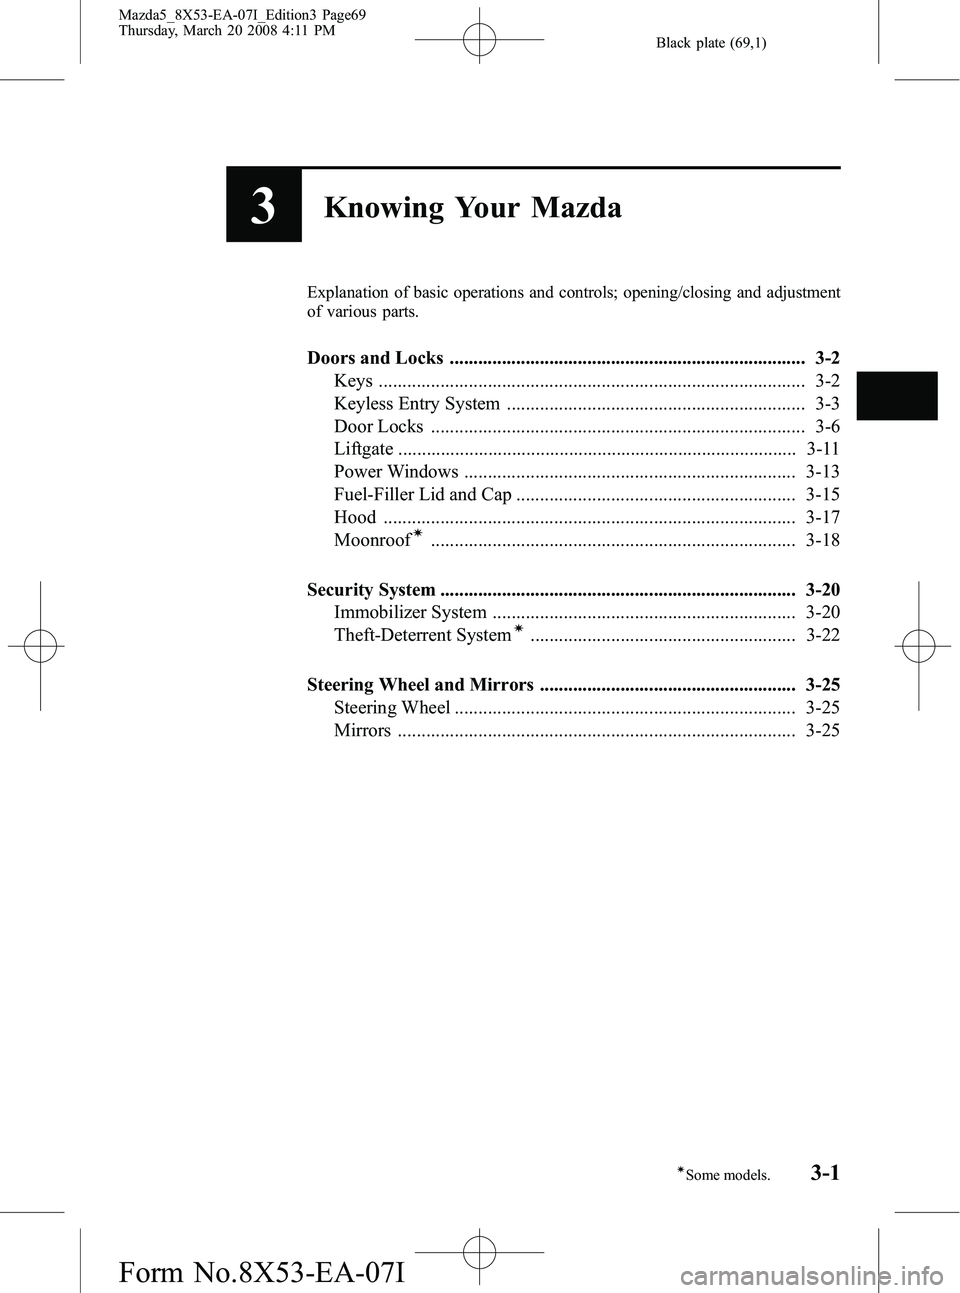 MAZDA MODEL 5 2008  Owners Manual Black plate (69,1)
3Knowing Your Mazda
Explanation of basic operations and controls; opening/closing and adjustment
of various parts.
Doors and Locks ..................................................